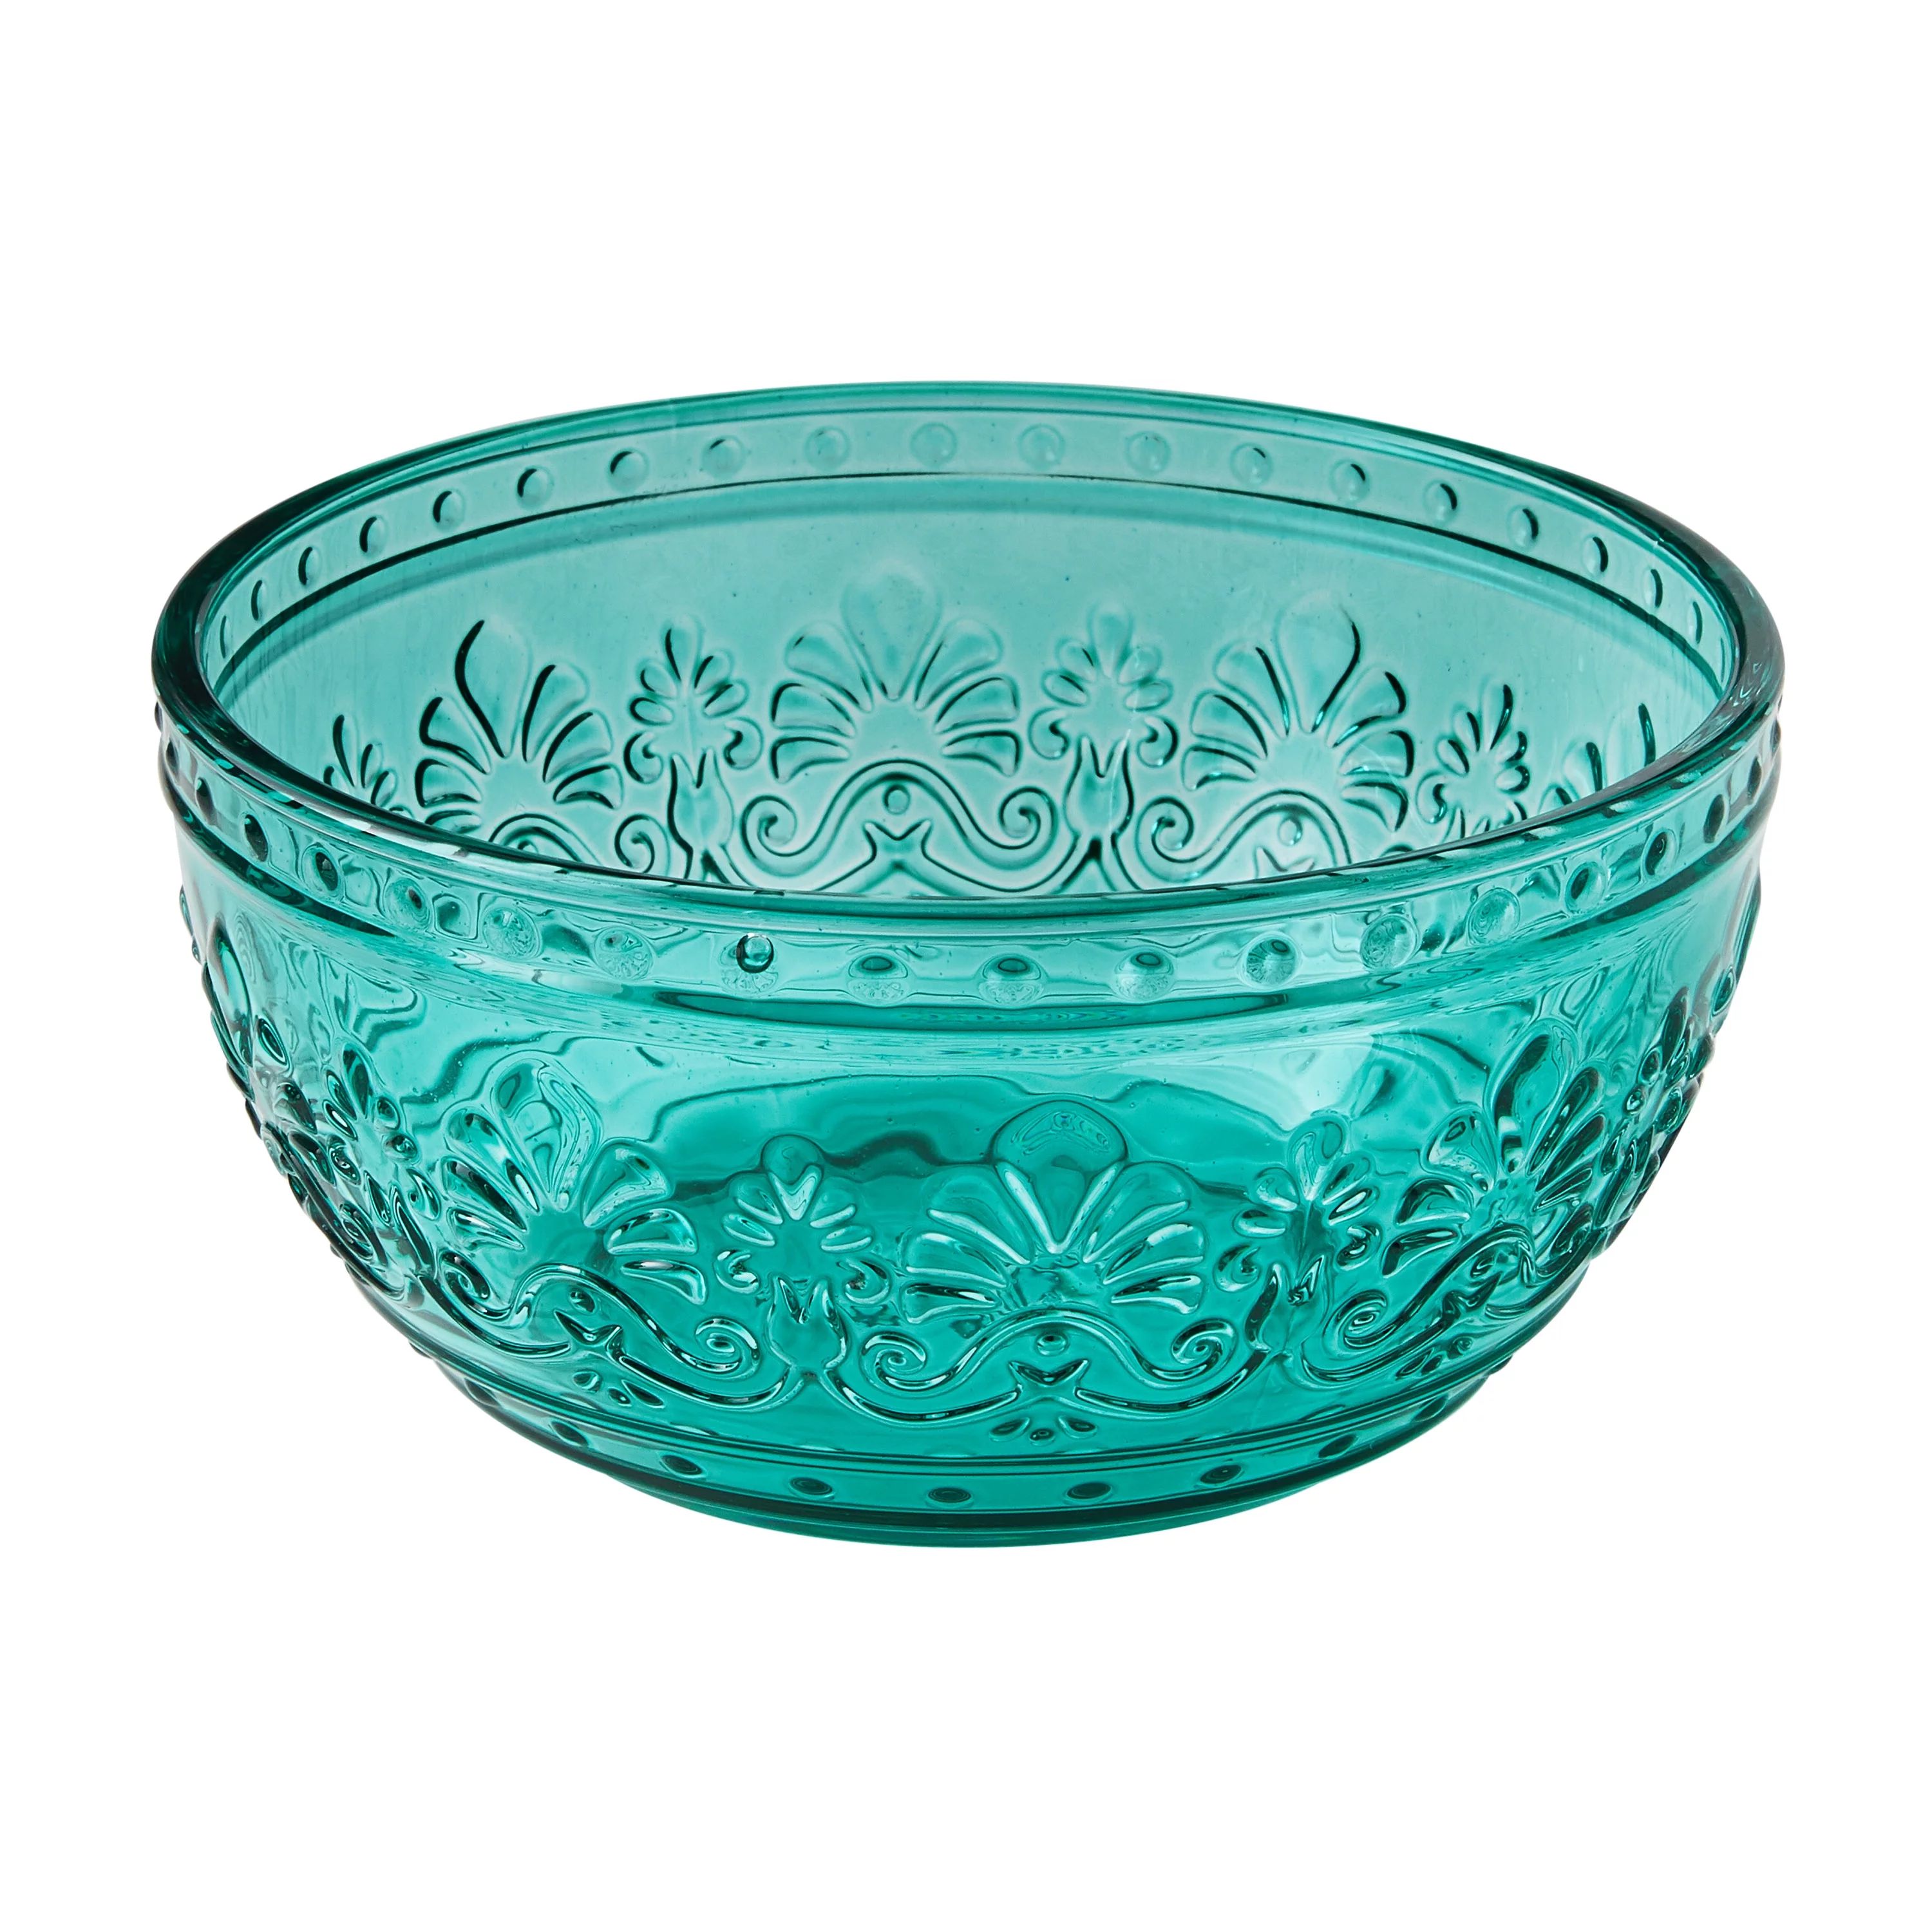 The Pioneer Woman Cassie Glass Cereal Bowl, Teal | Walmart (US)